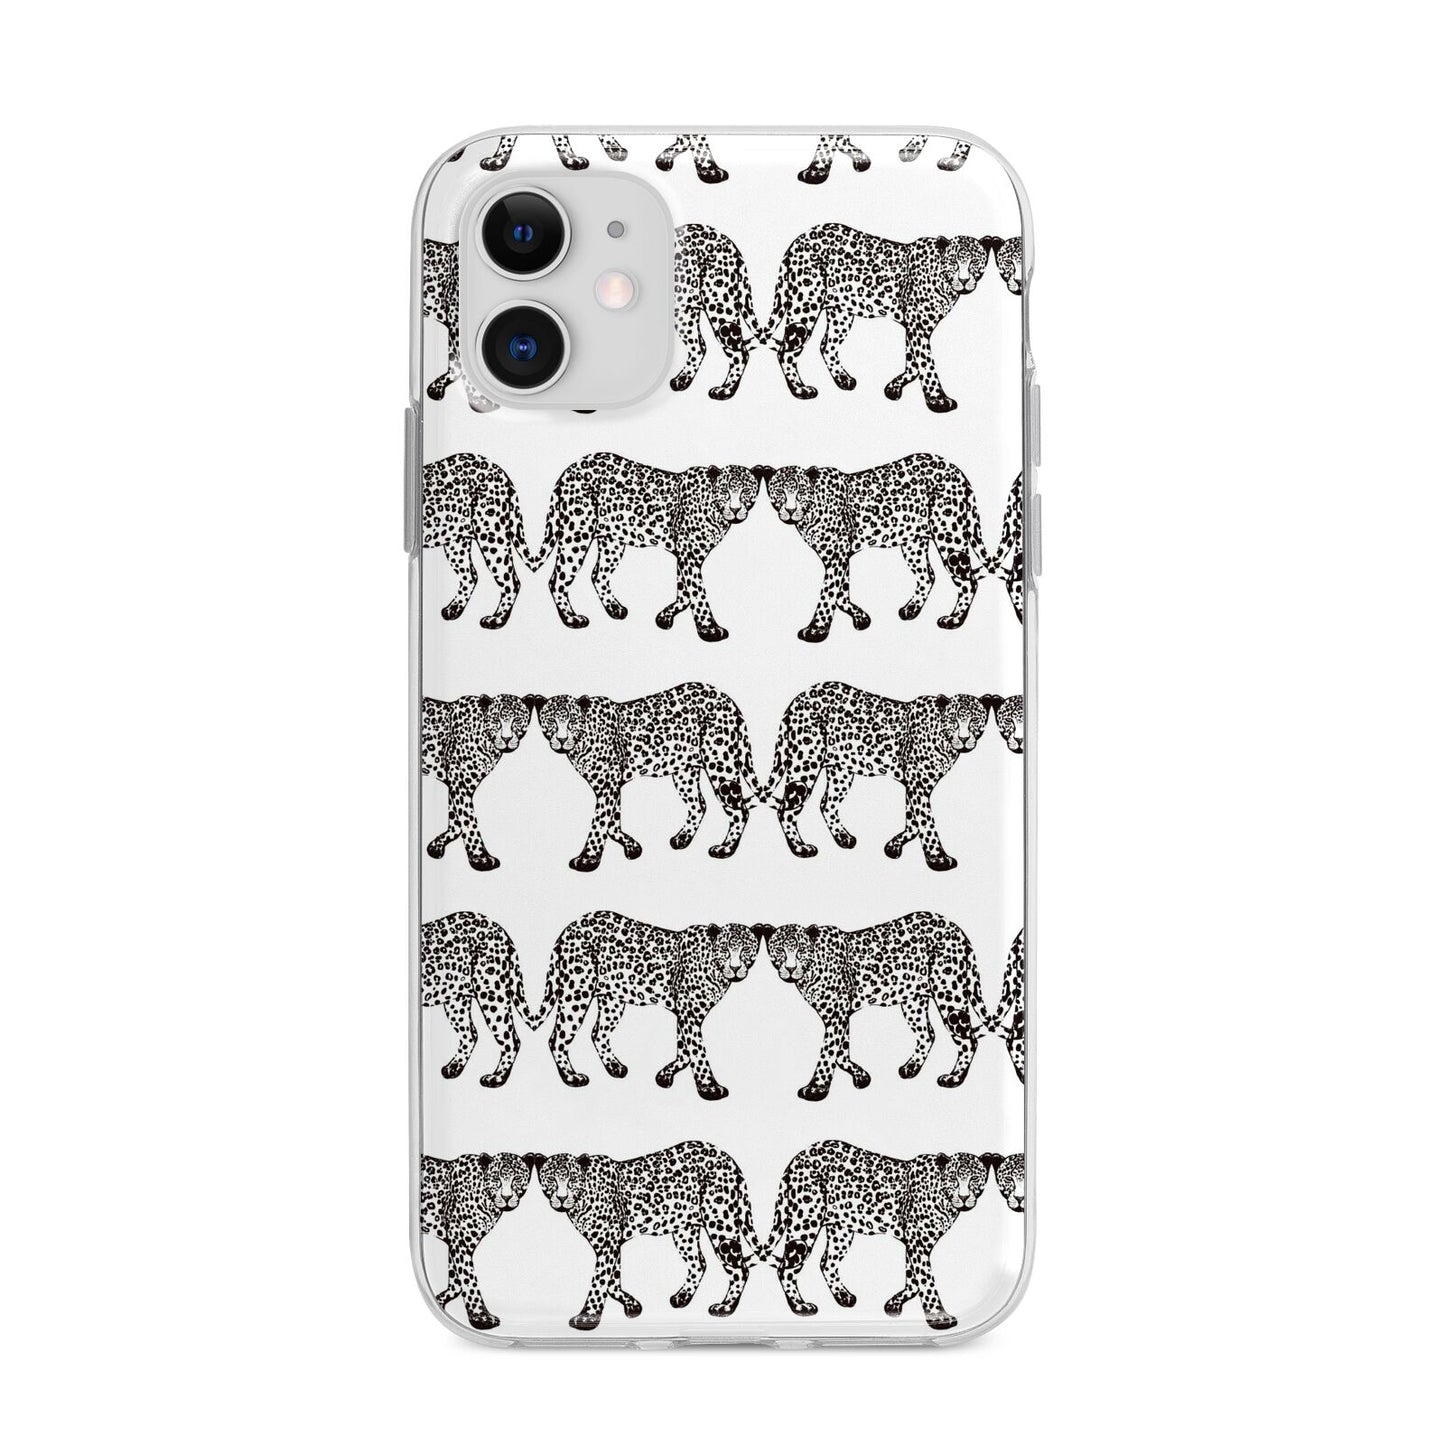 Monochrome Mirrored Leopard Print Apple iPhone 11 in White with Bumper Case